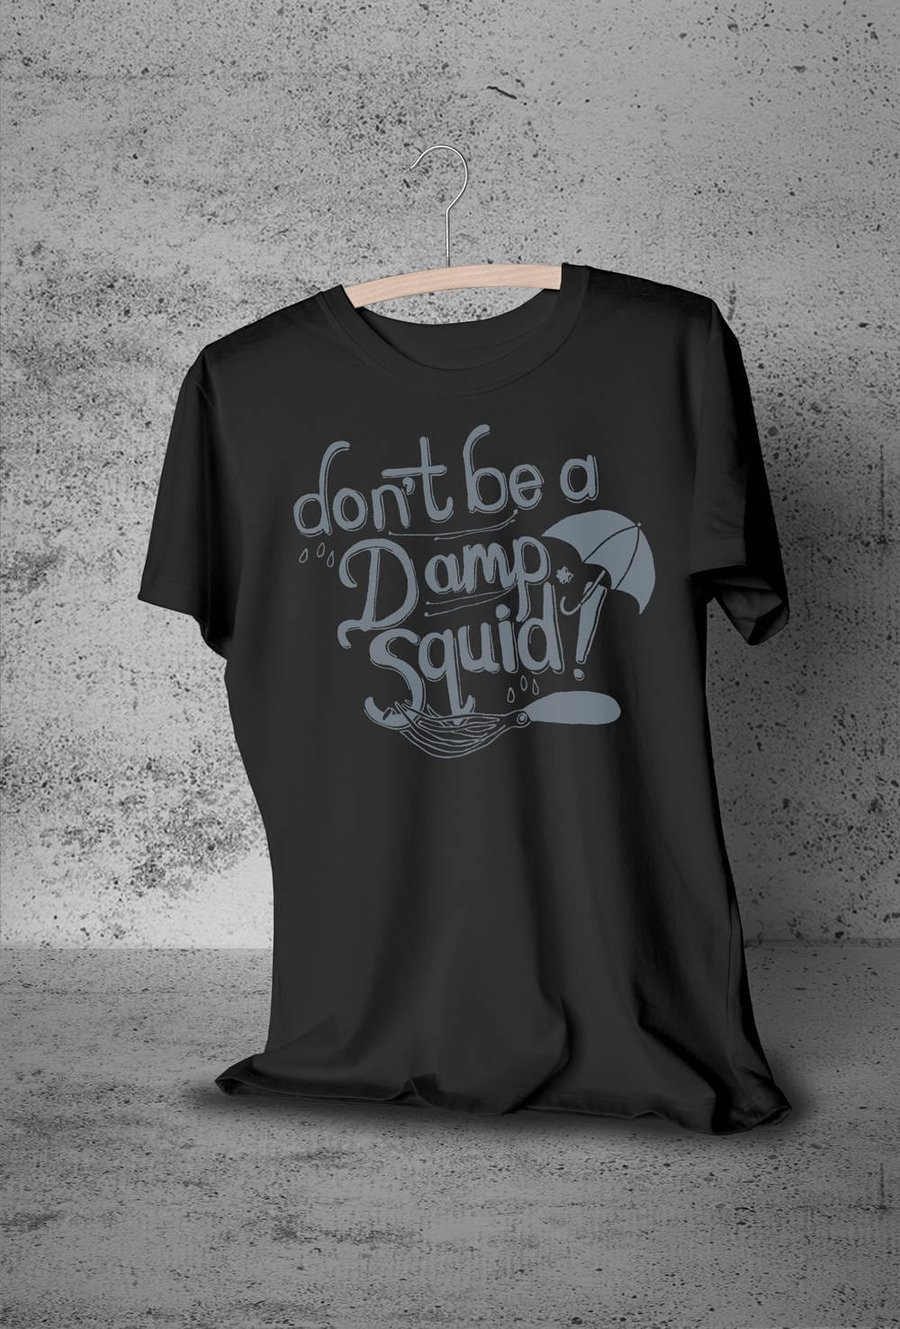 Mens Type T-Shirt- Misquoted Phrases Series tee: Damp SquidSquib graphic top